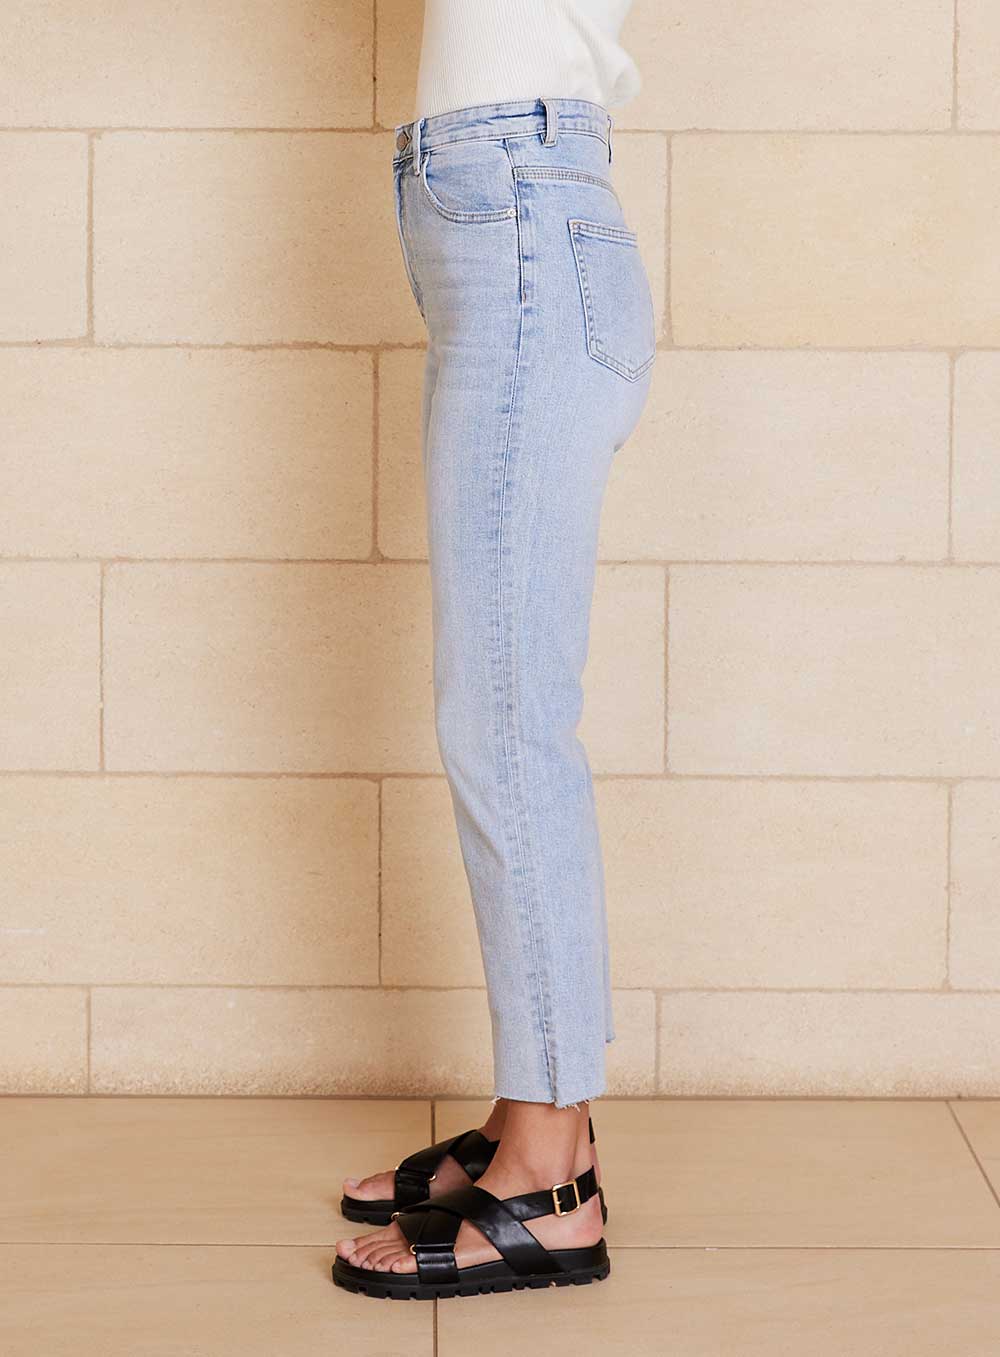 The High Mum Jean in clear waters colour is super high rise, kick leg and cropped, raw edge, zip fly fastening and stretch denim in 100% cotton